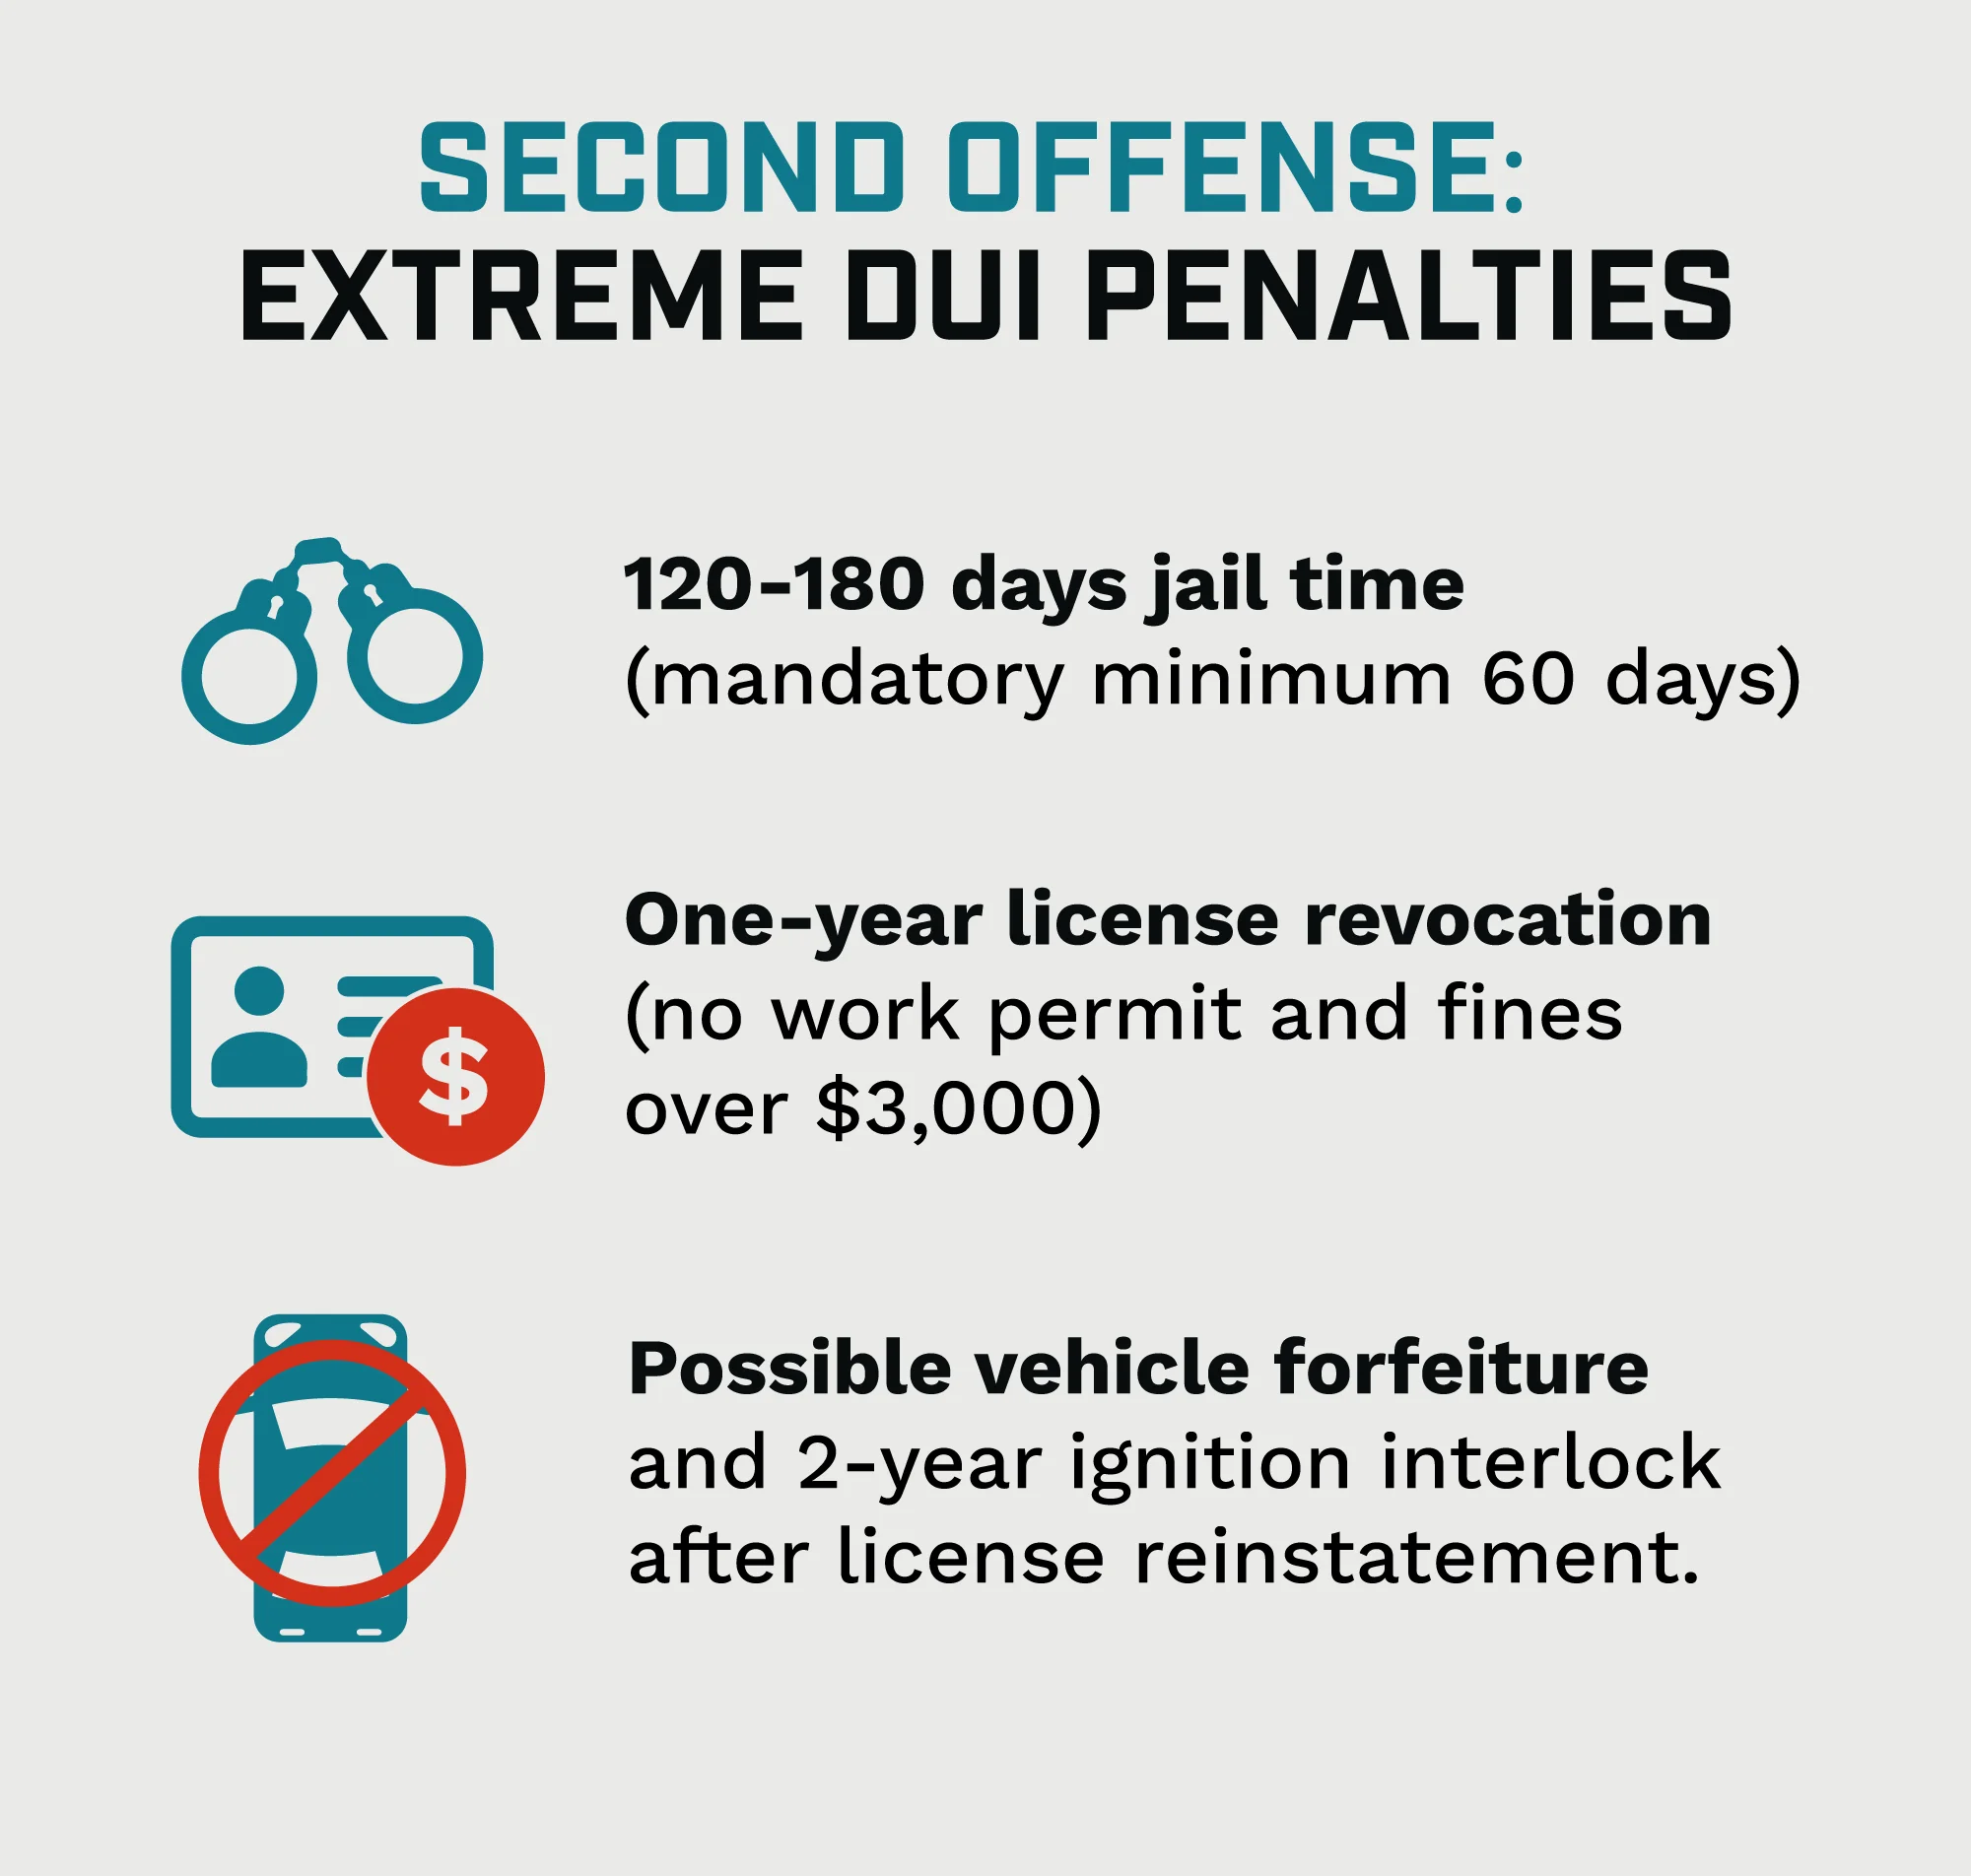 second offense: extreme dui penalties